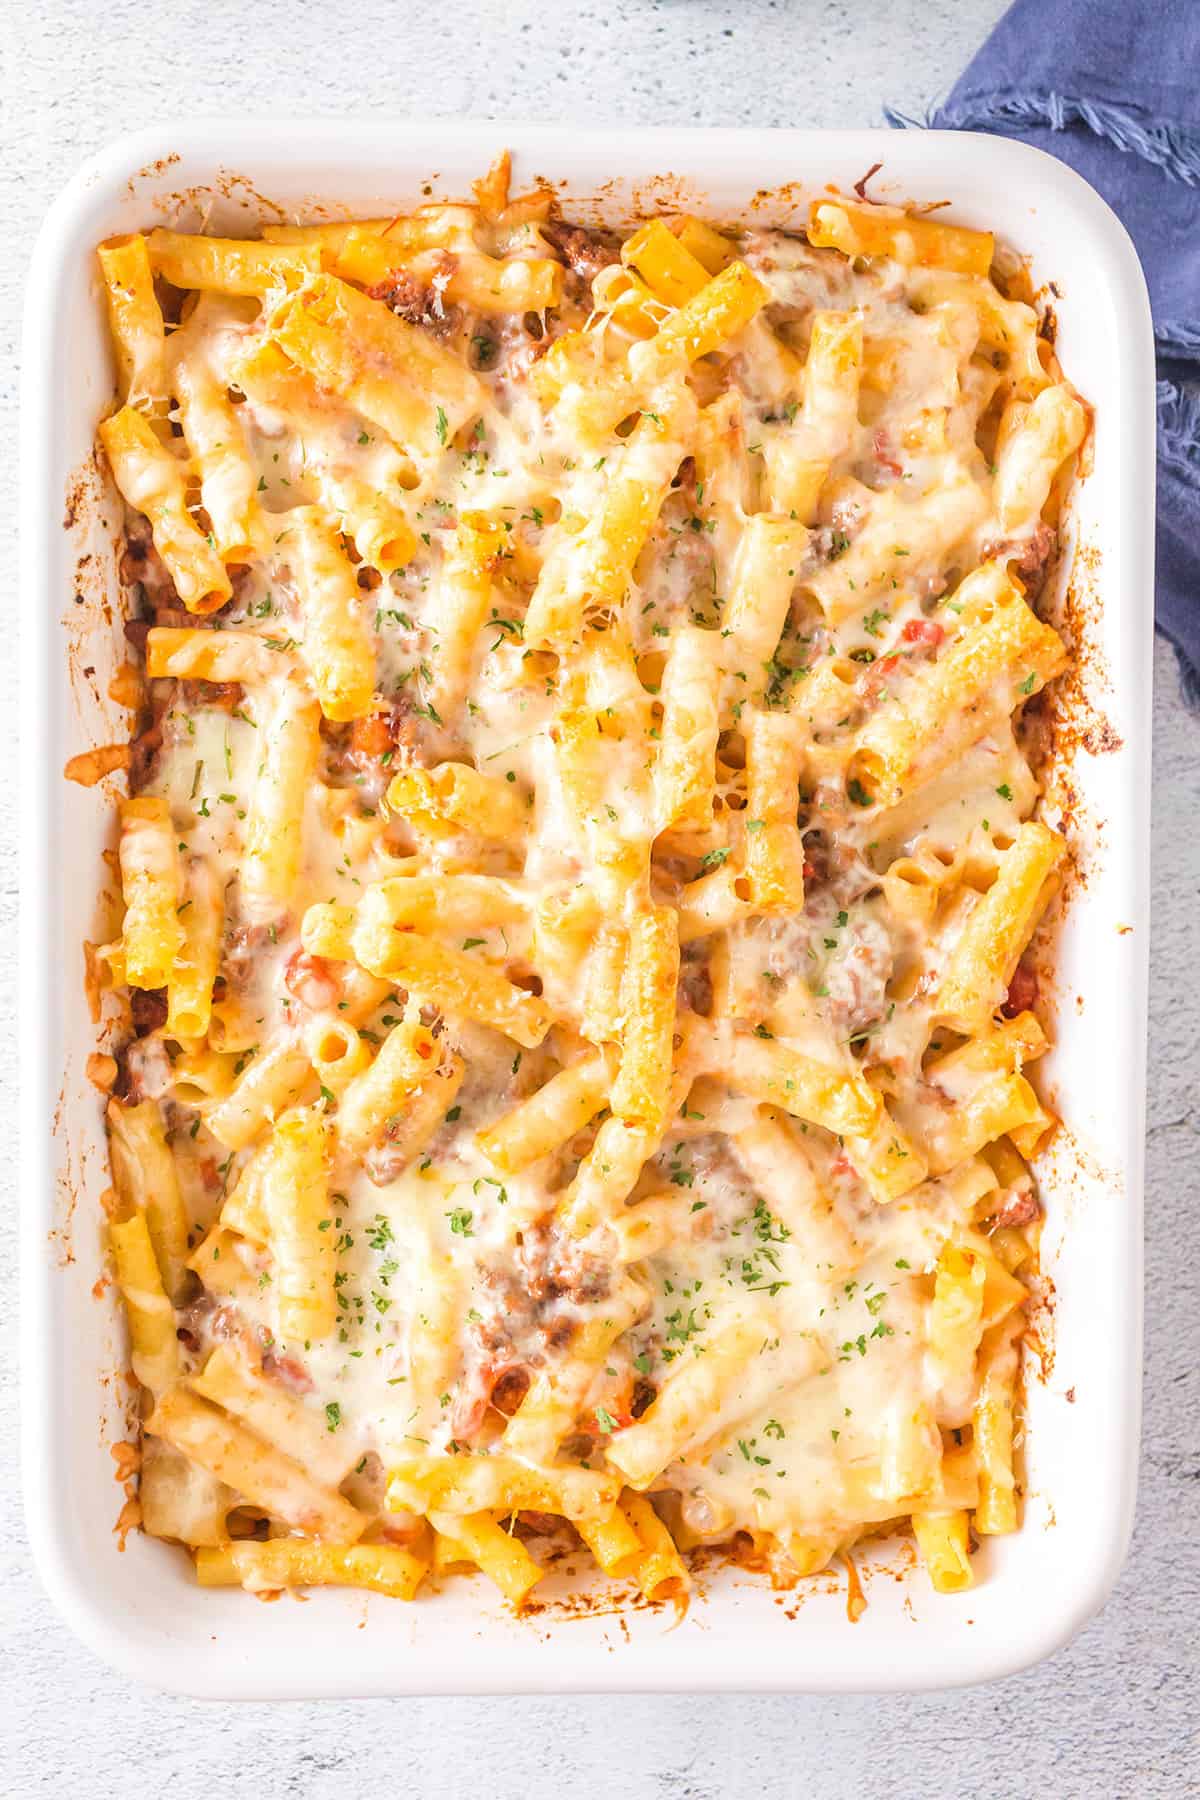 Finished baked ziti in a baking dish.